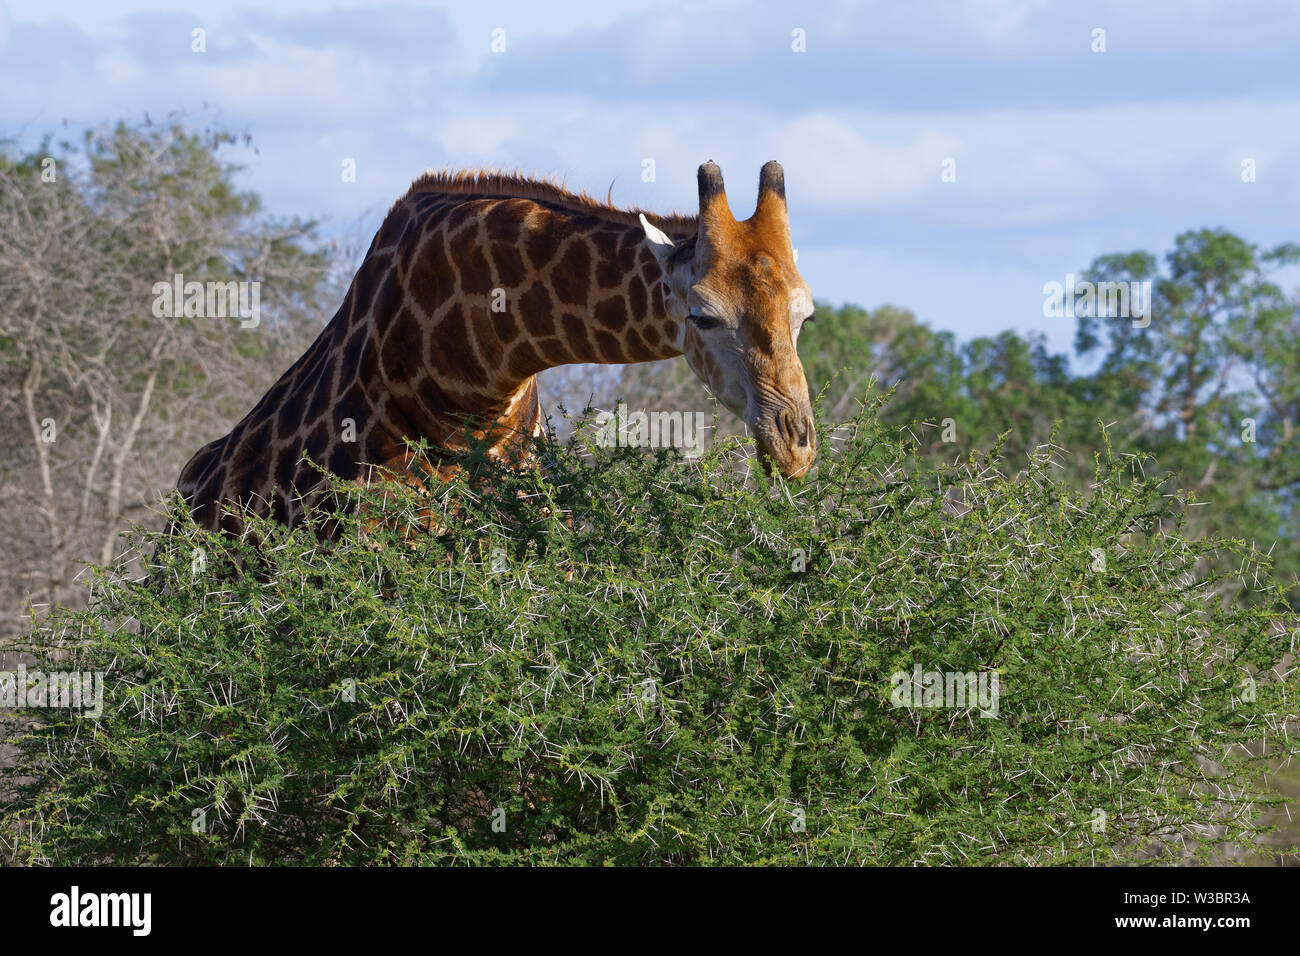 South African giraffe (Giraffa camelopardalis giraffa), adult, feeding on leaves and thorns of a spiny shrub,Kruger National Park,South Africa, Africa Stock Photo